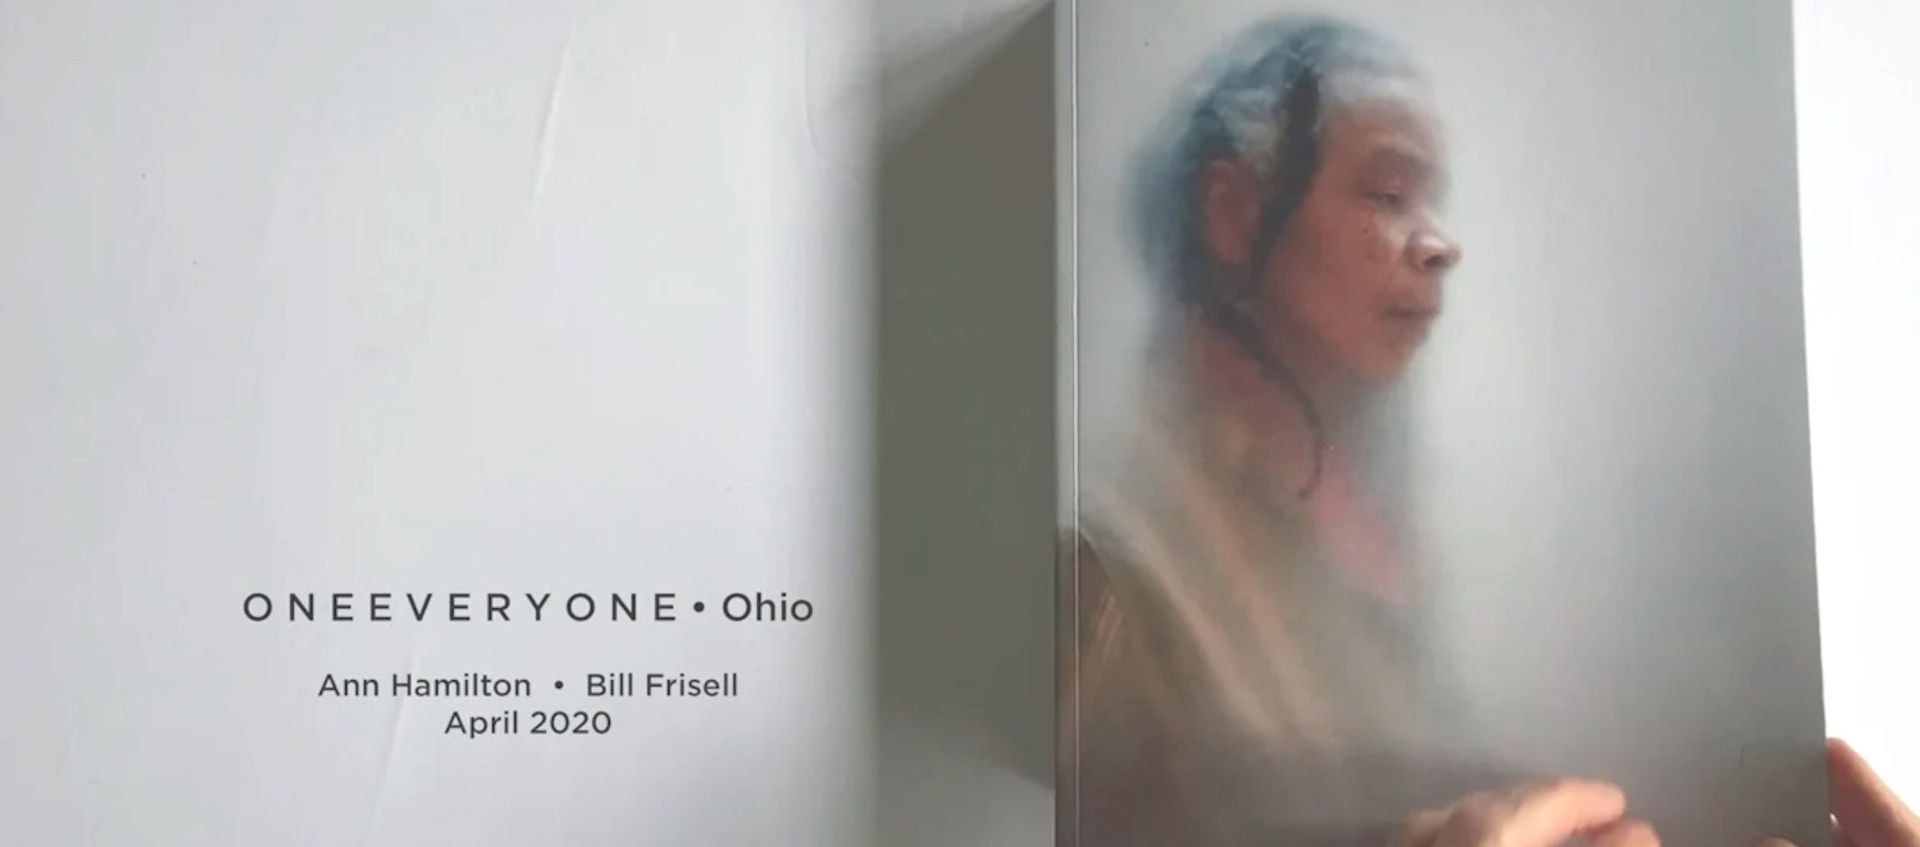 Opening image from the video of artist Ann Hamilton's ONEEVERYONE book. Dancer Bebe Miller is seen on the cover.